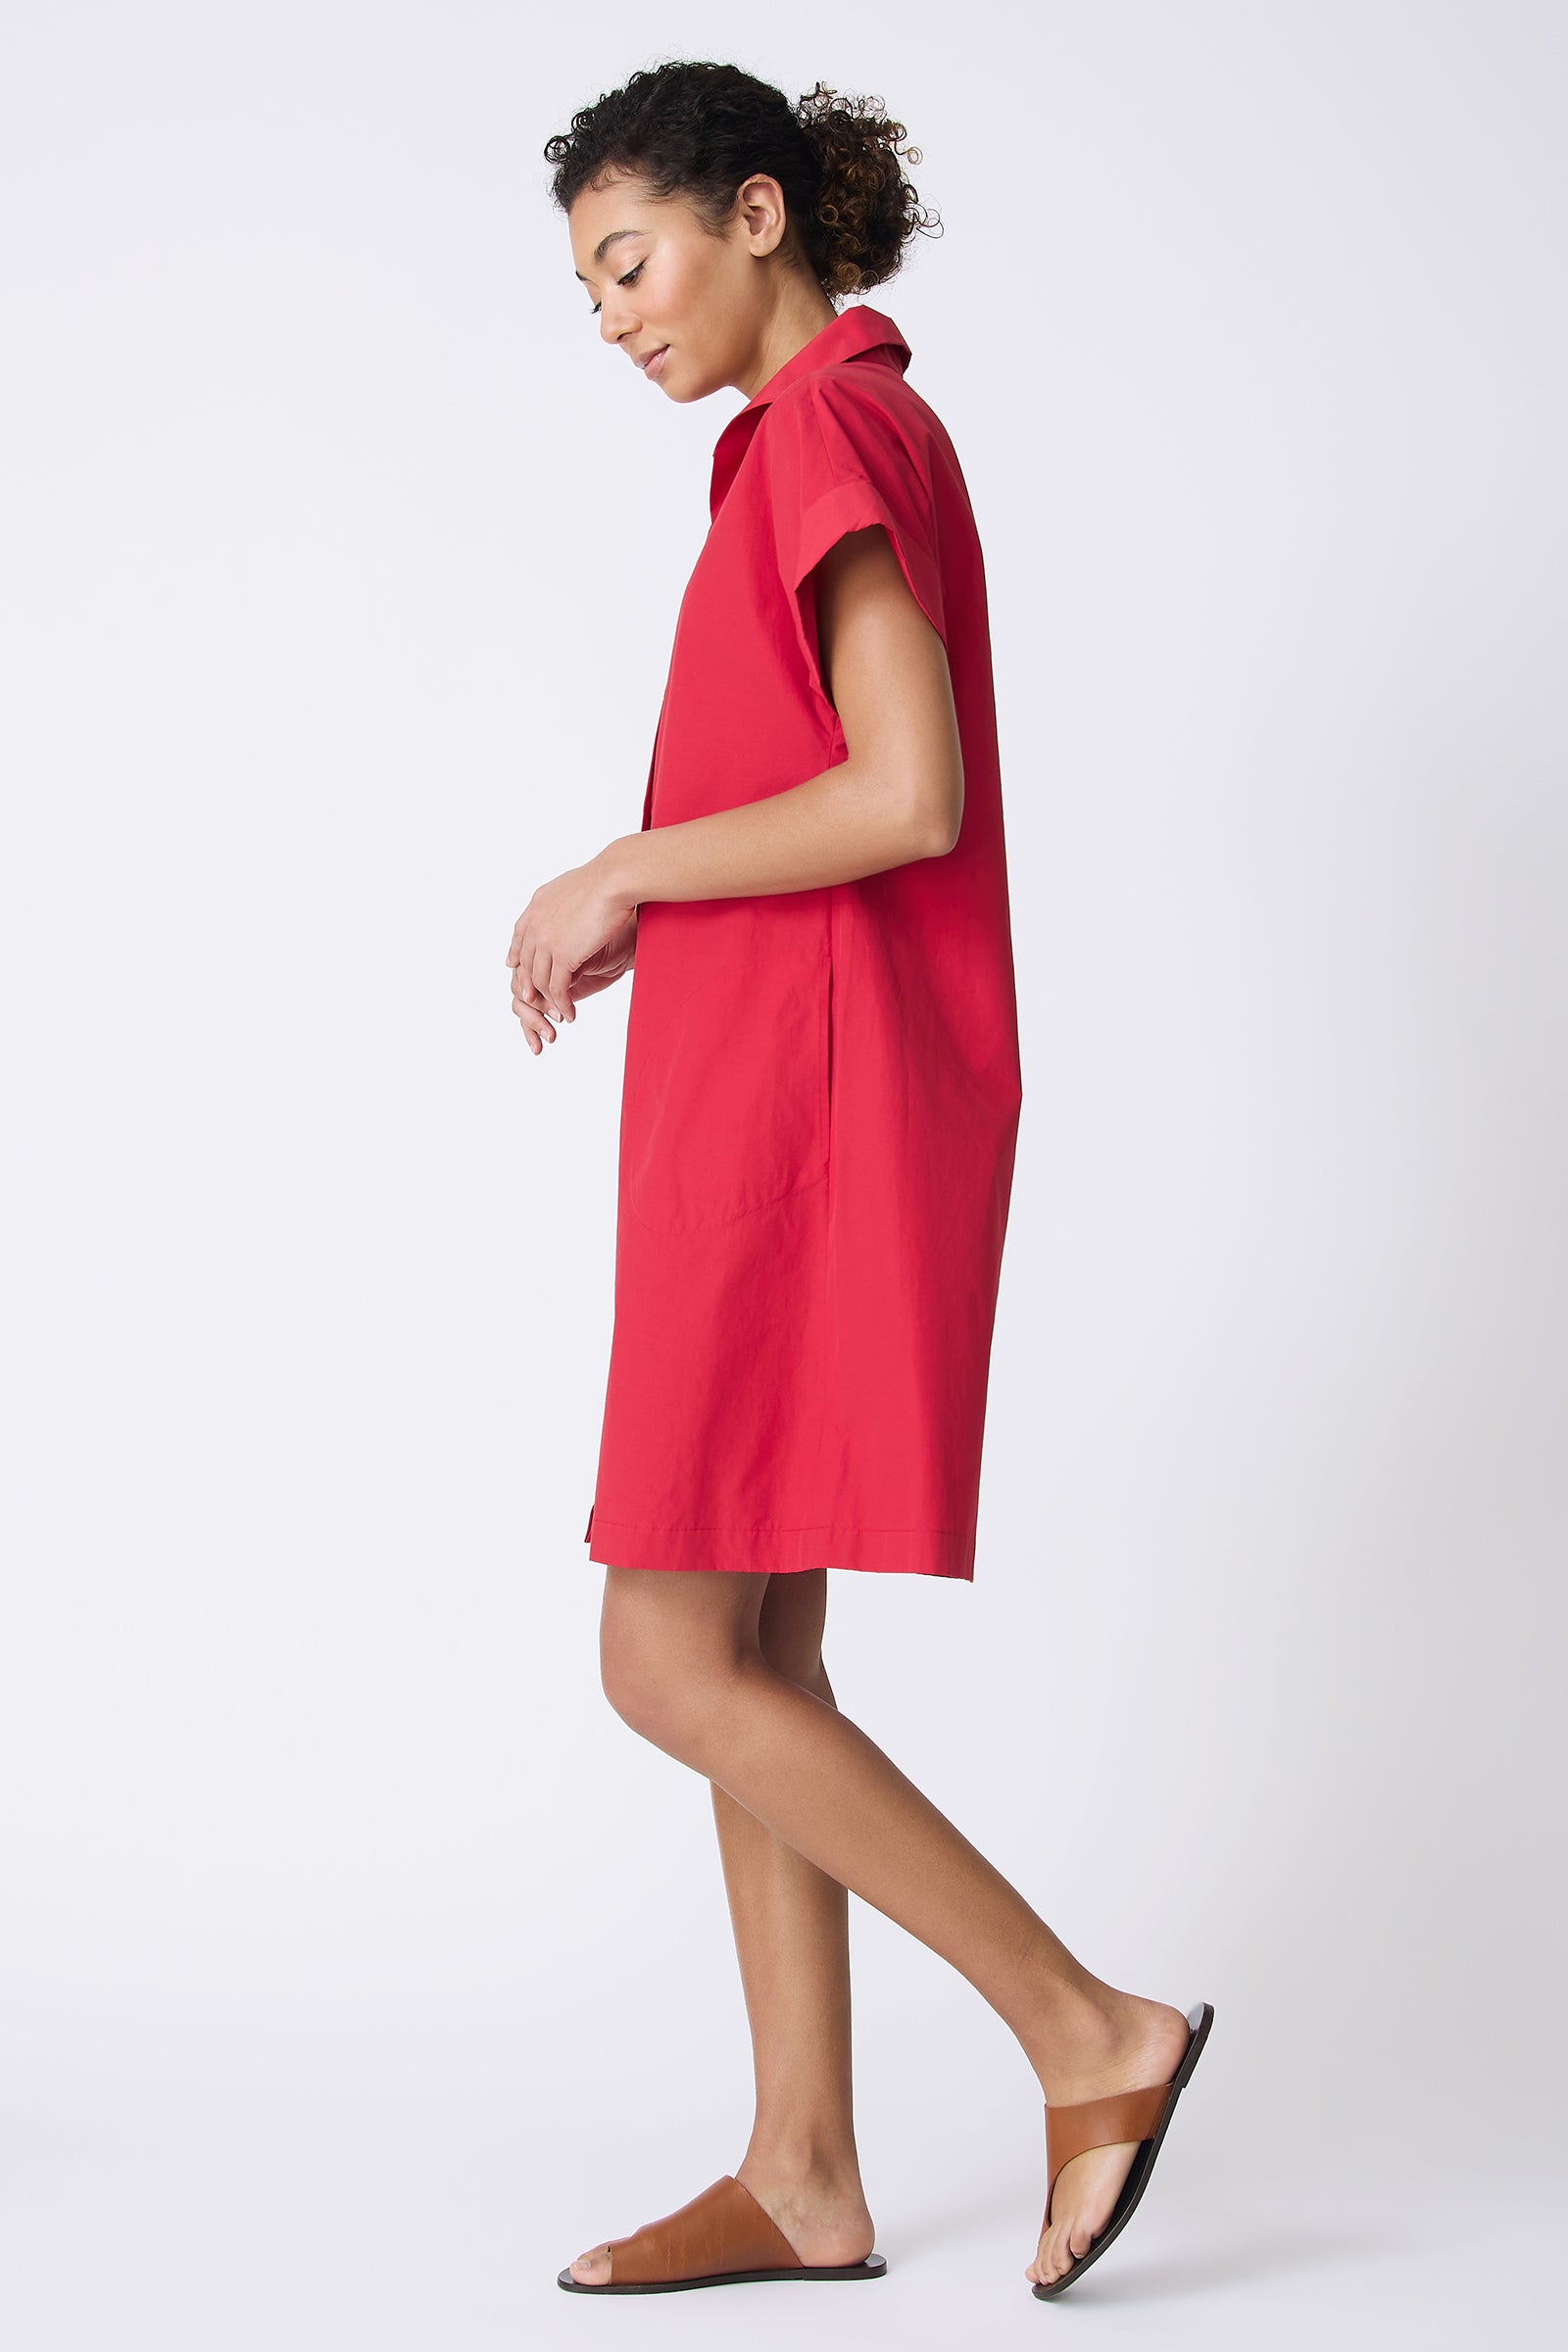 Kal Rieman Holly Kimono Dress in Red on model looking down full side view